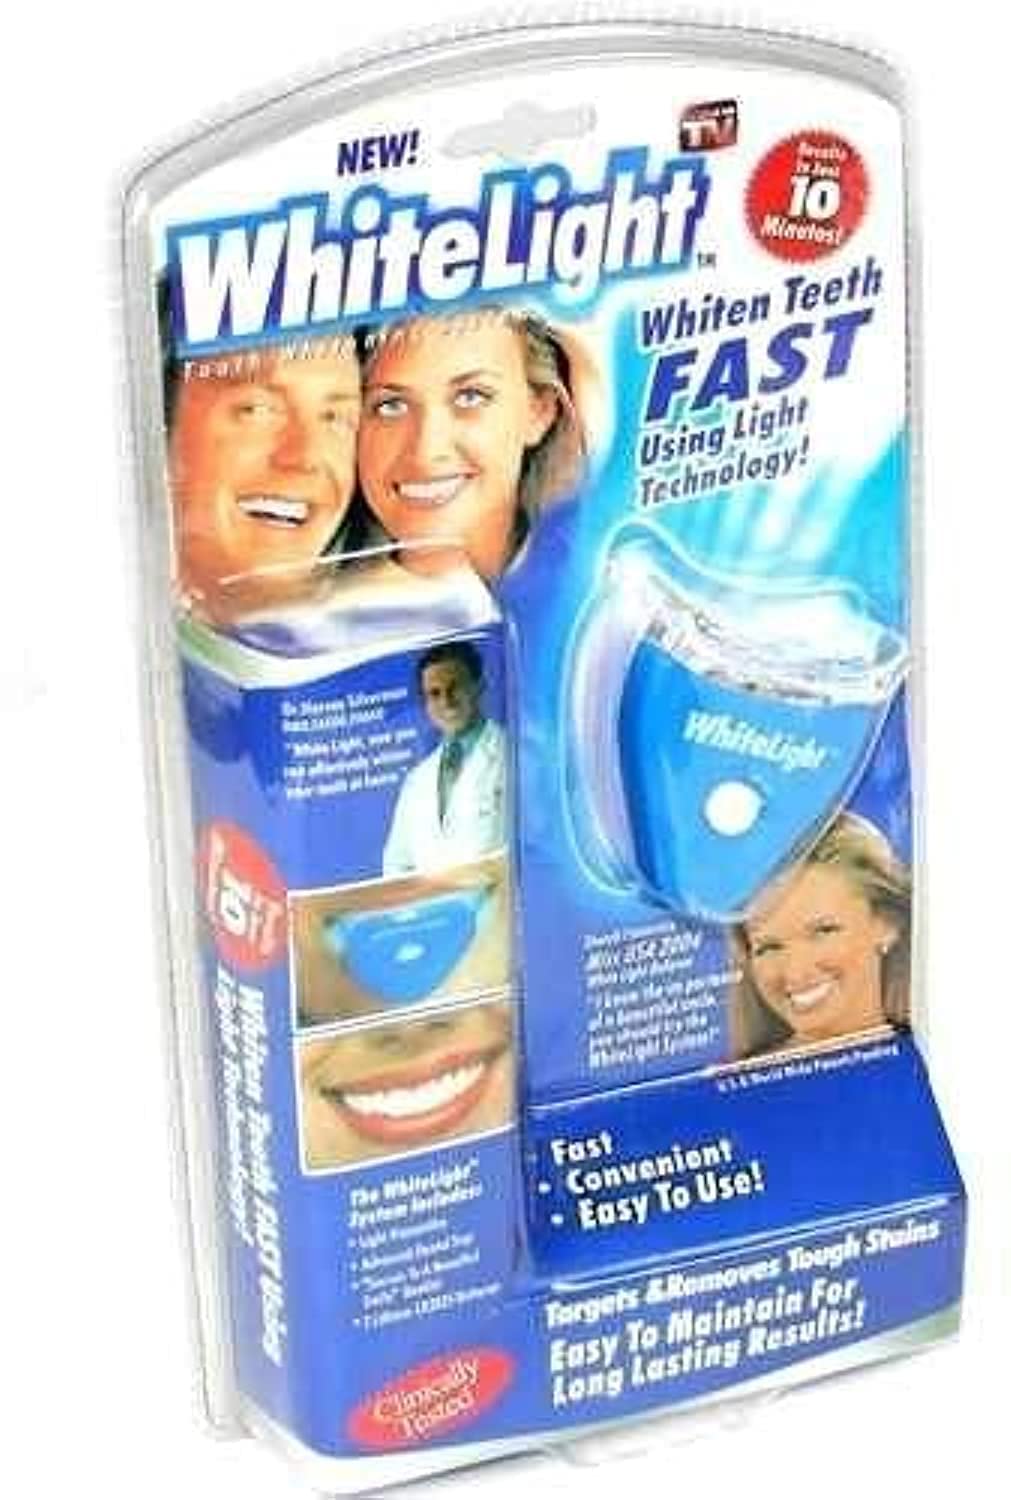 White Light tooth whitening system